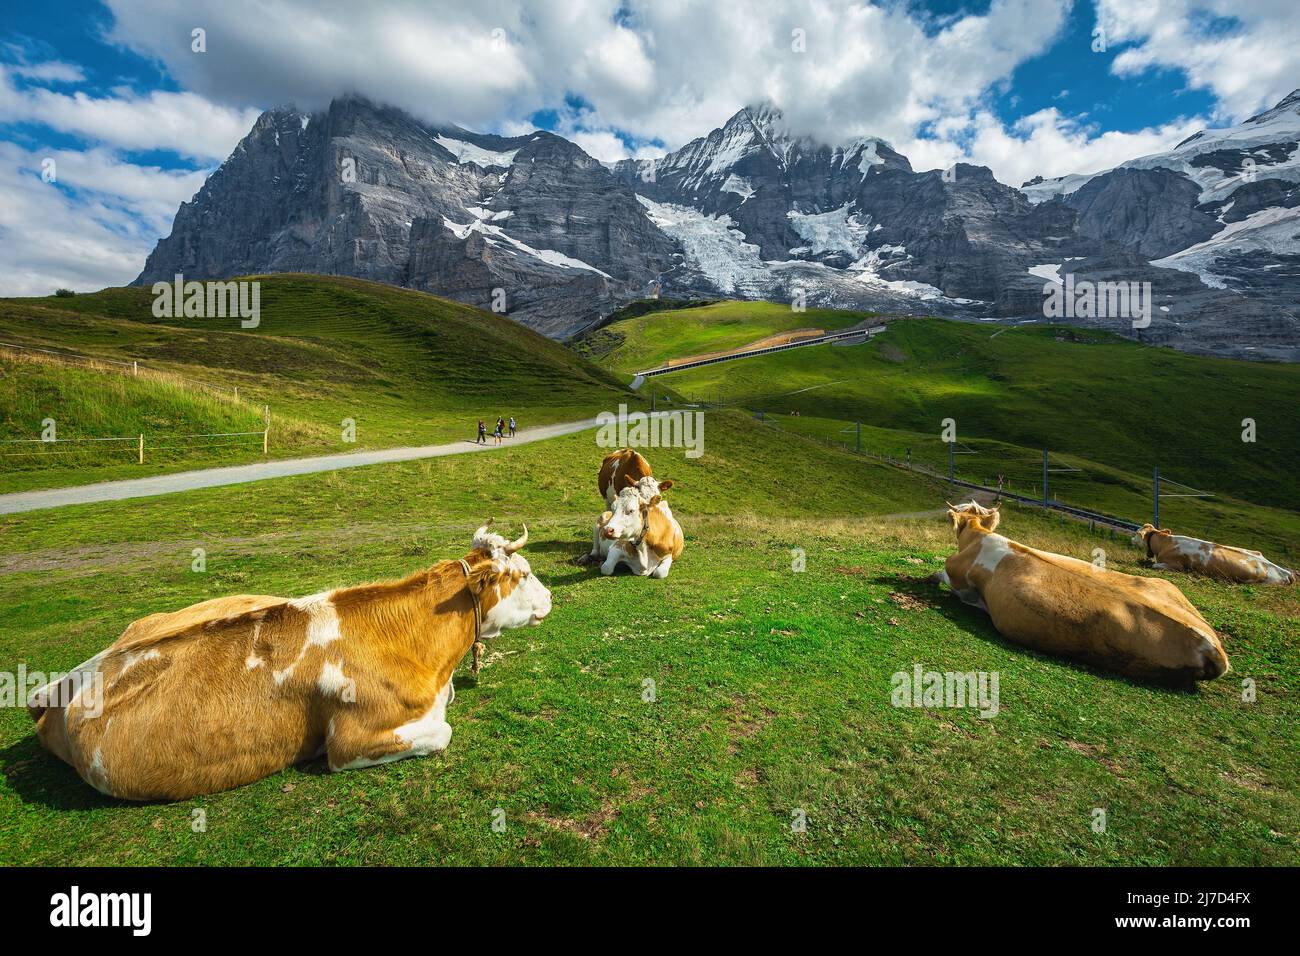 Cows grazing on the green mountain pasture and great view with high mountains in background, Grindelwald, Bernese Oberland, Switzerland, Europe Stock Photo